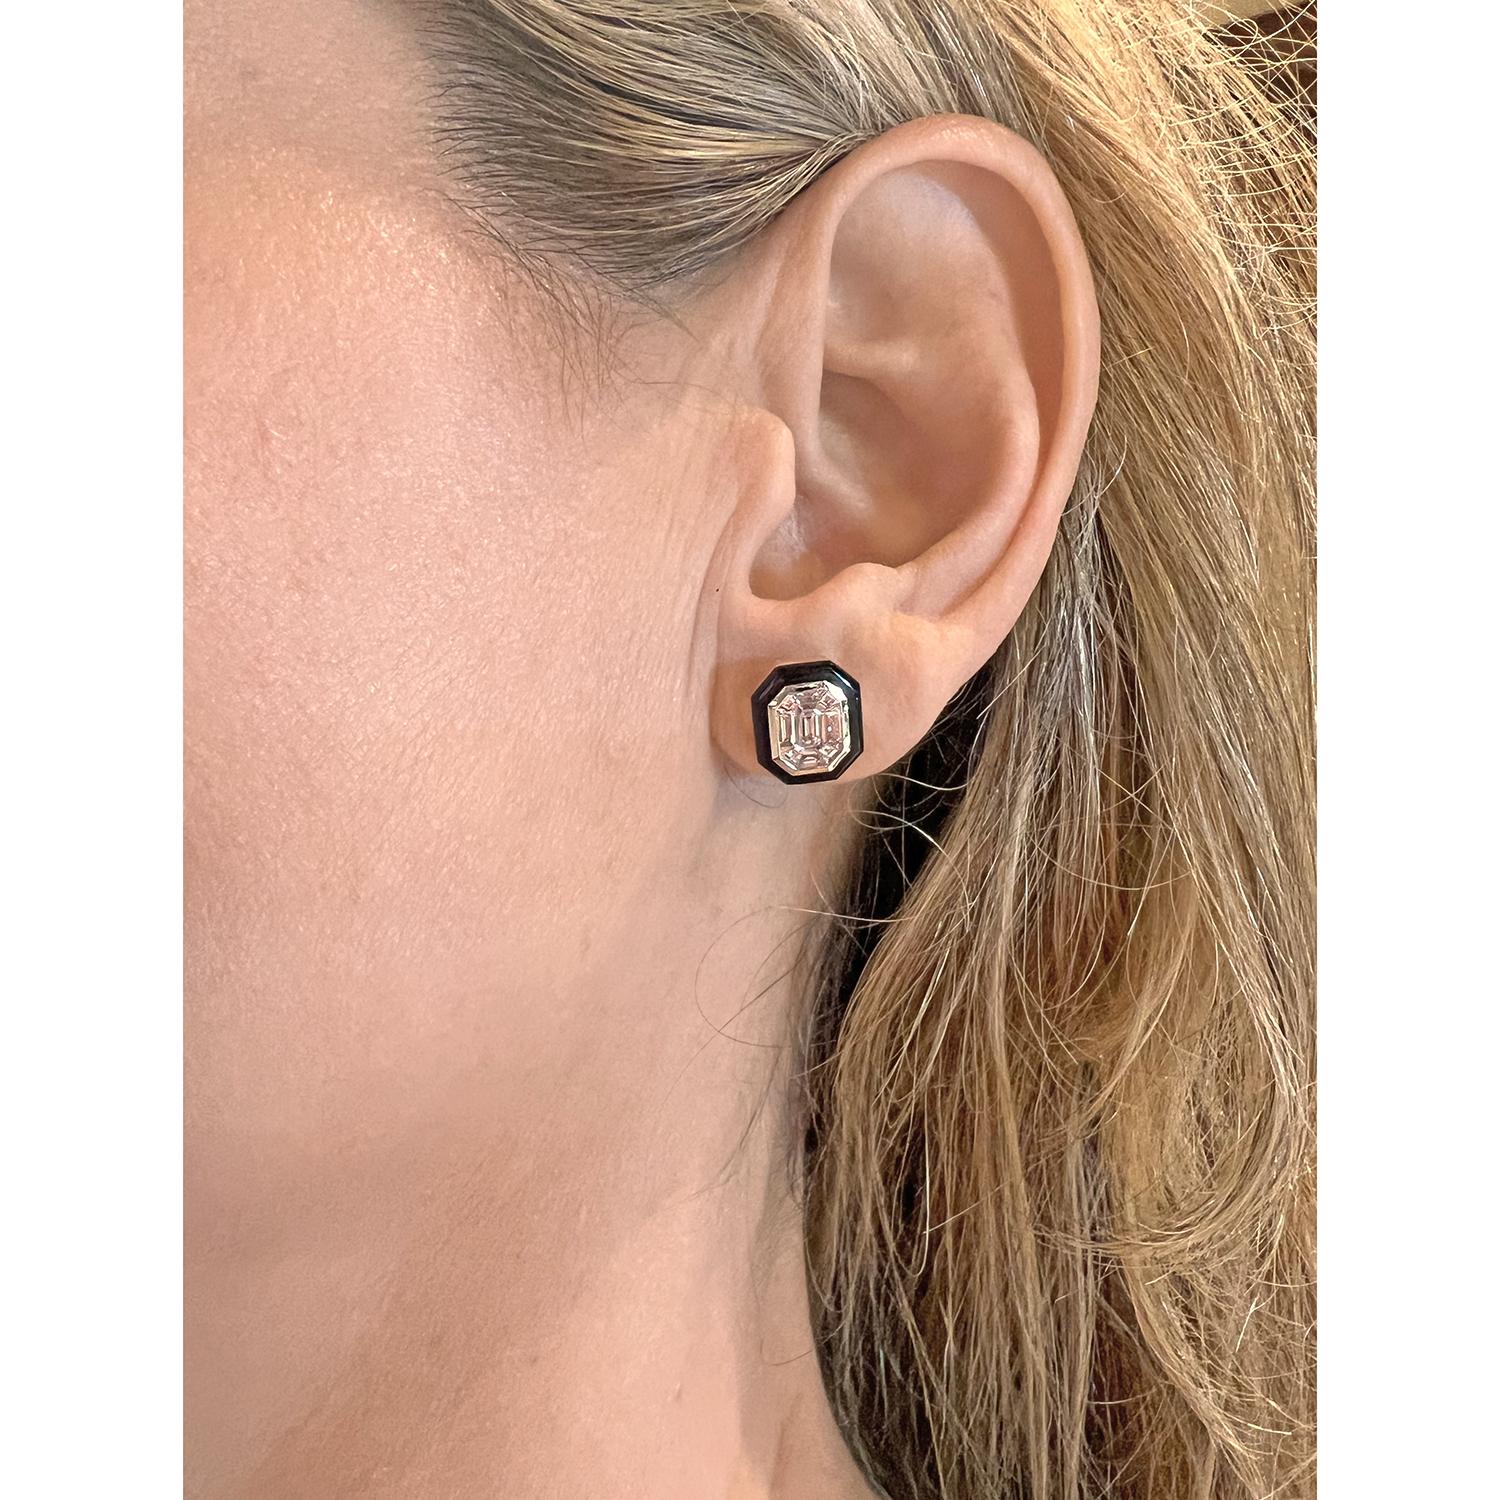 Octagonal-shaped diamond mosaic stud earrings, centering an emerald-cut diamond surrounded by calibre-cut diamonds bezel-set in 18k white gold and framed in carved black agate.  Eighteen diamonds weighing 2.28 total carats (two largest diamonds at